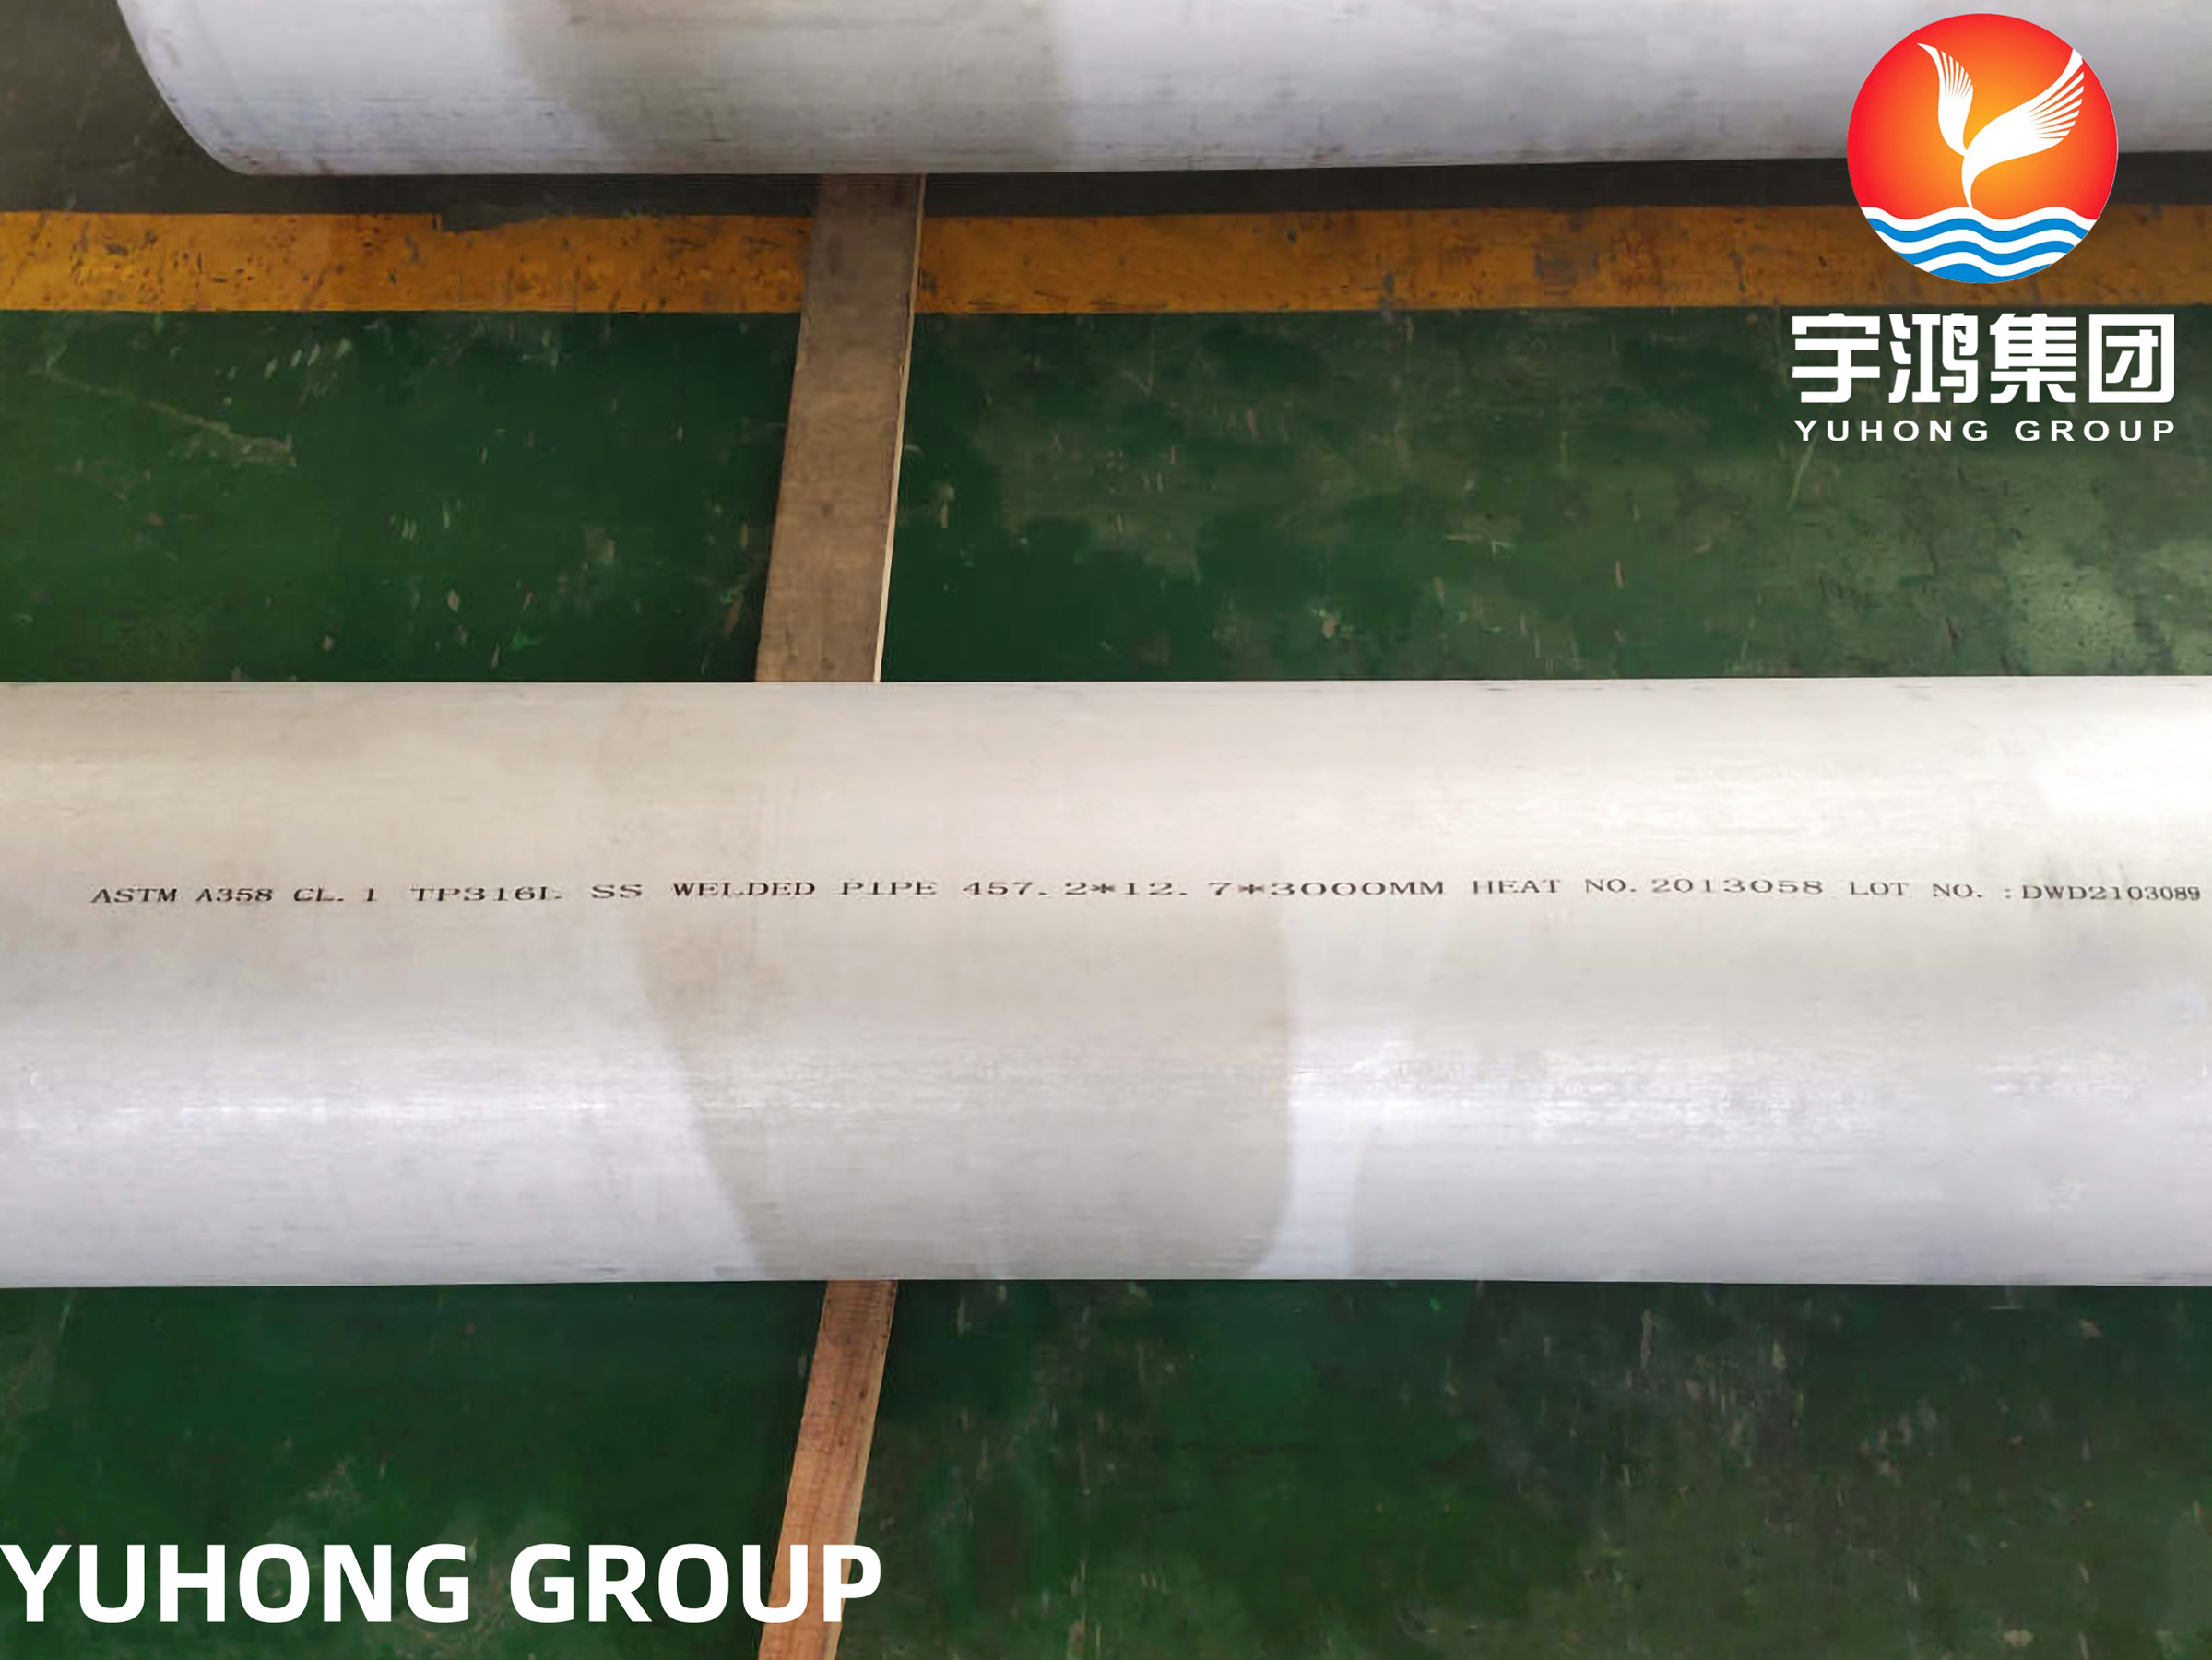 China ASTM A358 TP321-S CLASS 1 STAINLESS STEEL WELDED PIPE 100% RT PETROCHEMICAL APPLICATION wholesale